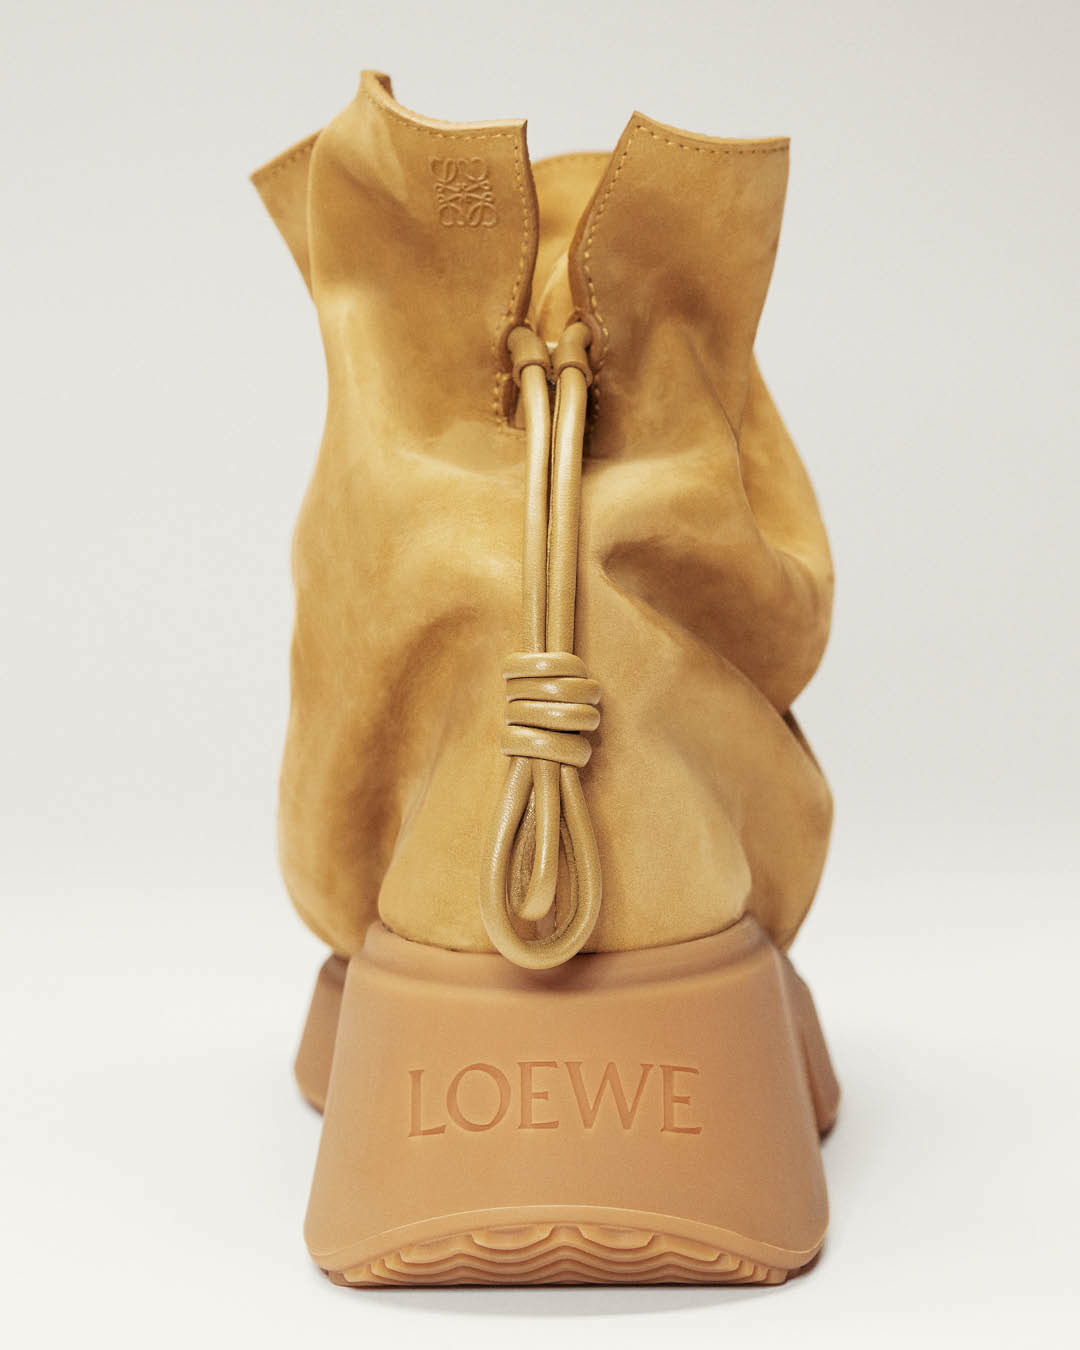  Shoes from Loewe FW 22.